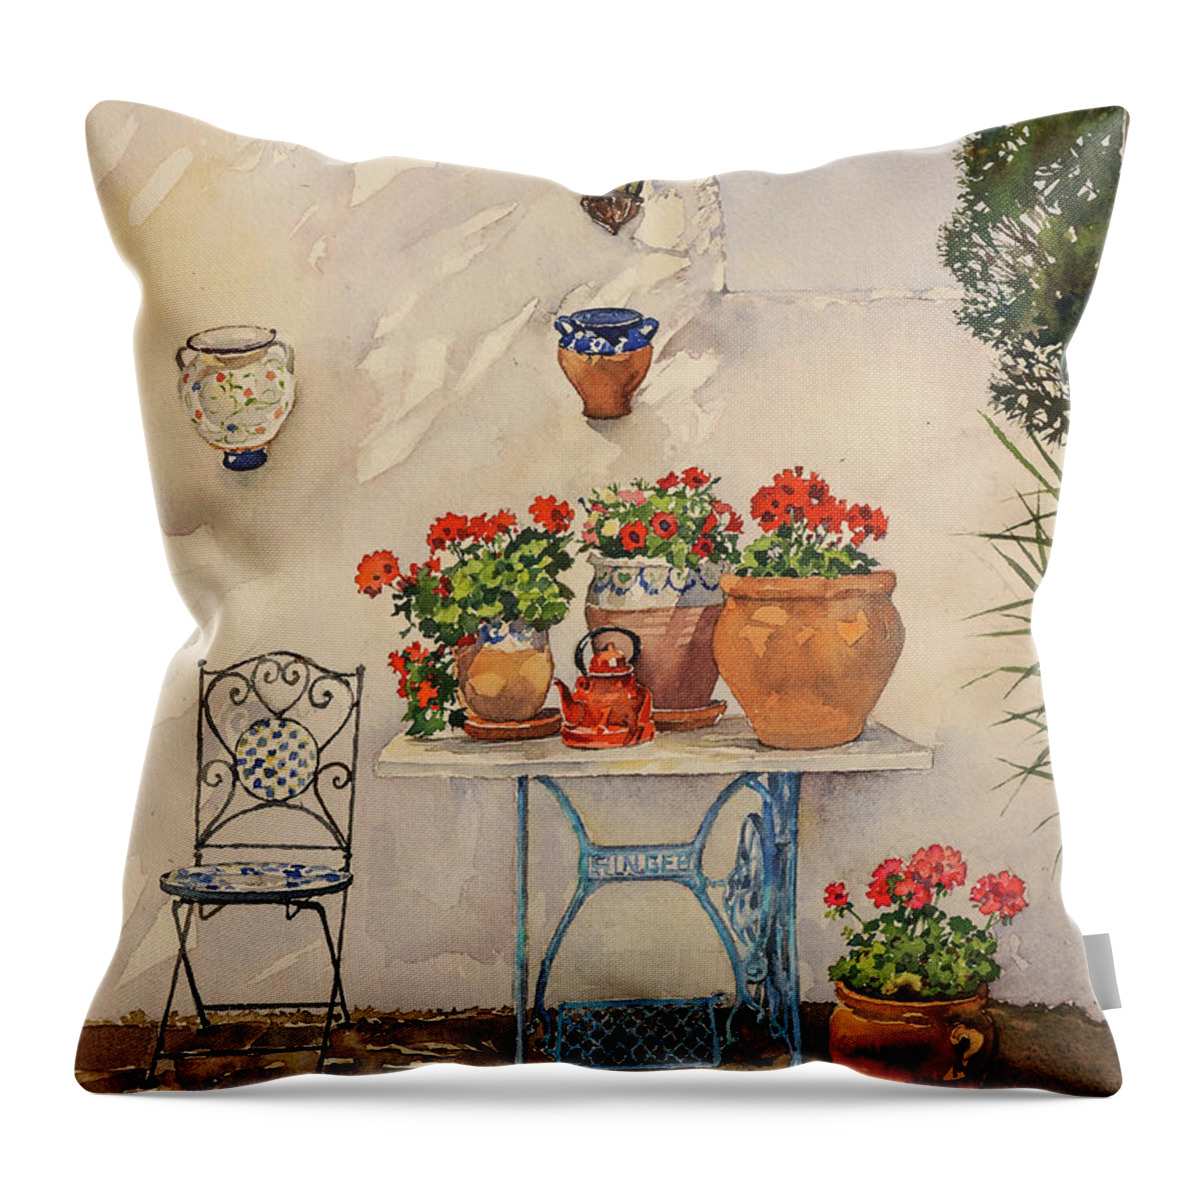  Throw Pillow featuring the painting A Corner of Utes Garden by Margaret Merry